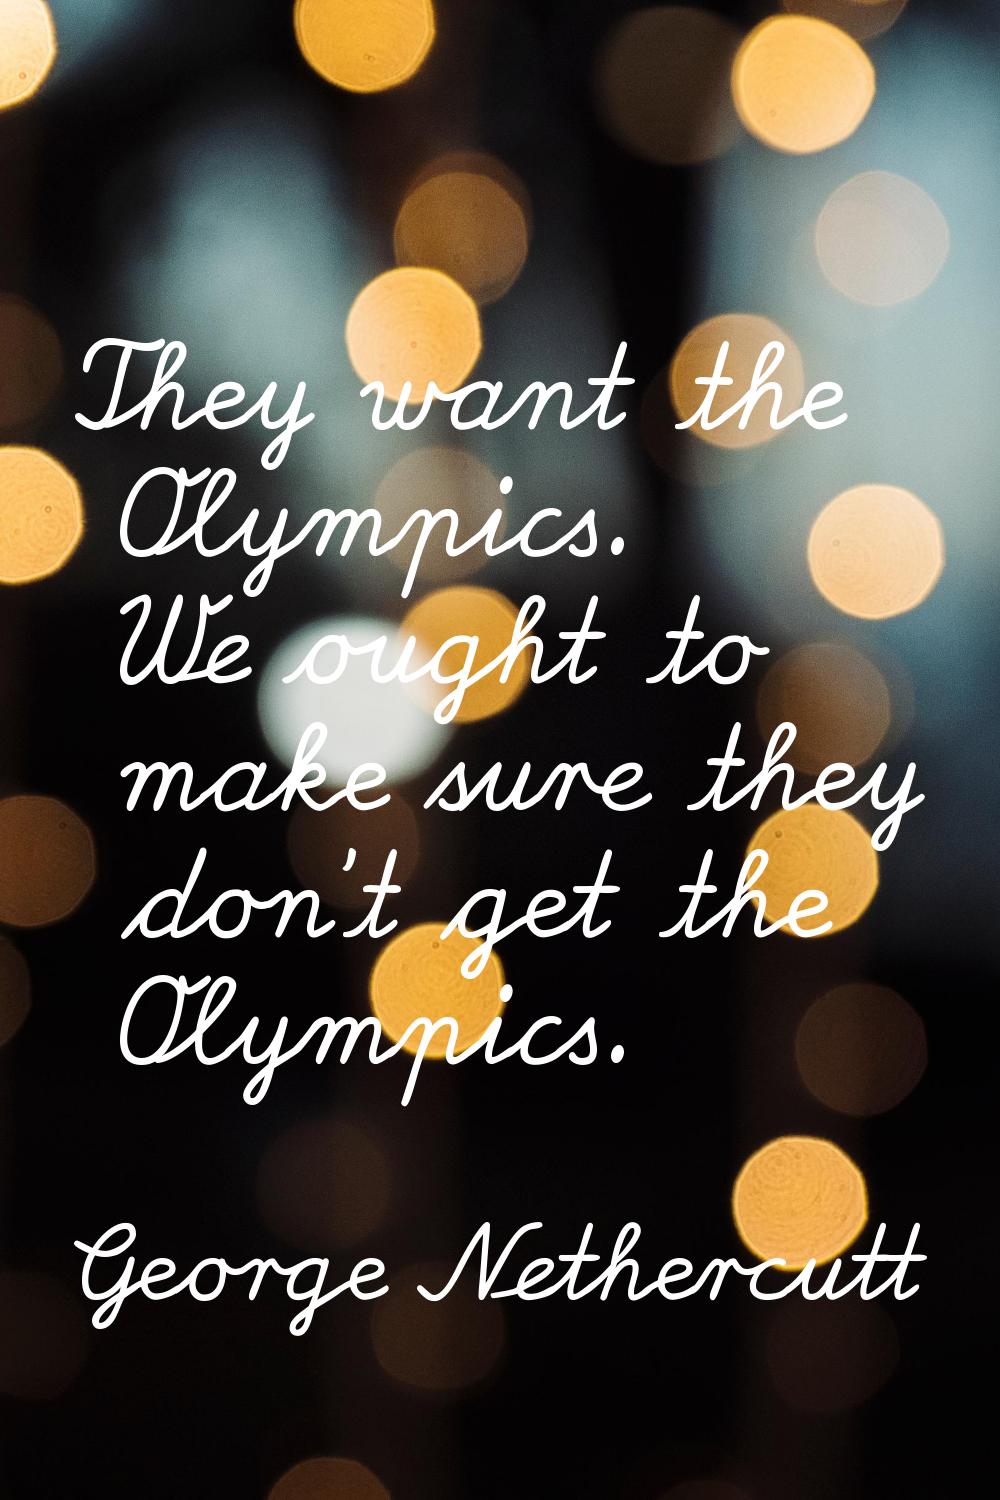 They want the Olympics. We ought to make sure they don't get the Olympics.